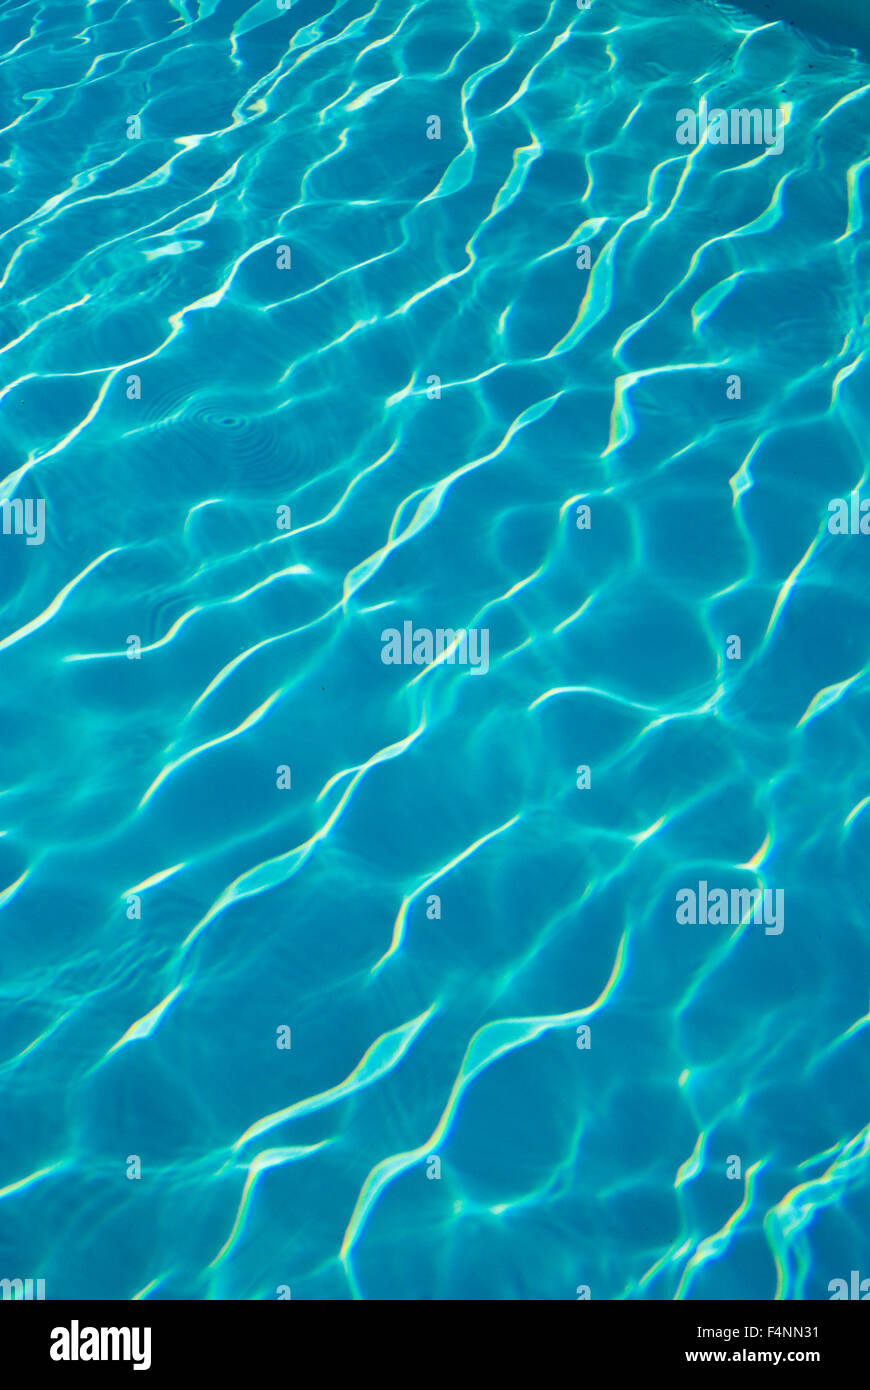 Blue water, ripples, reflections, swimming pool. Stock Photo